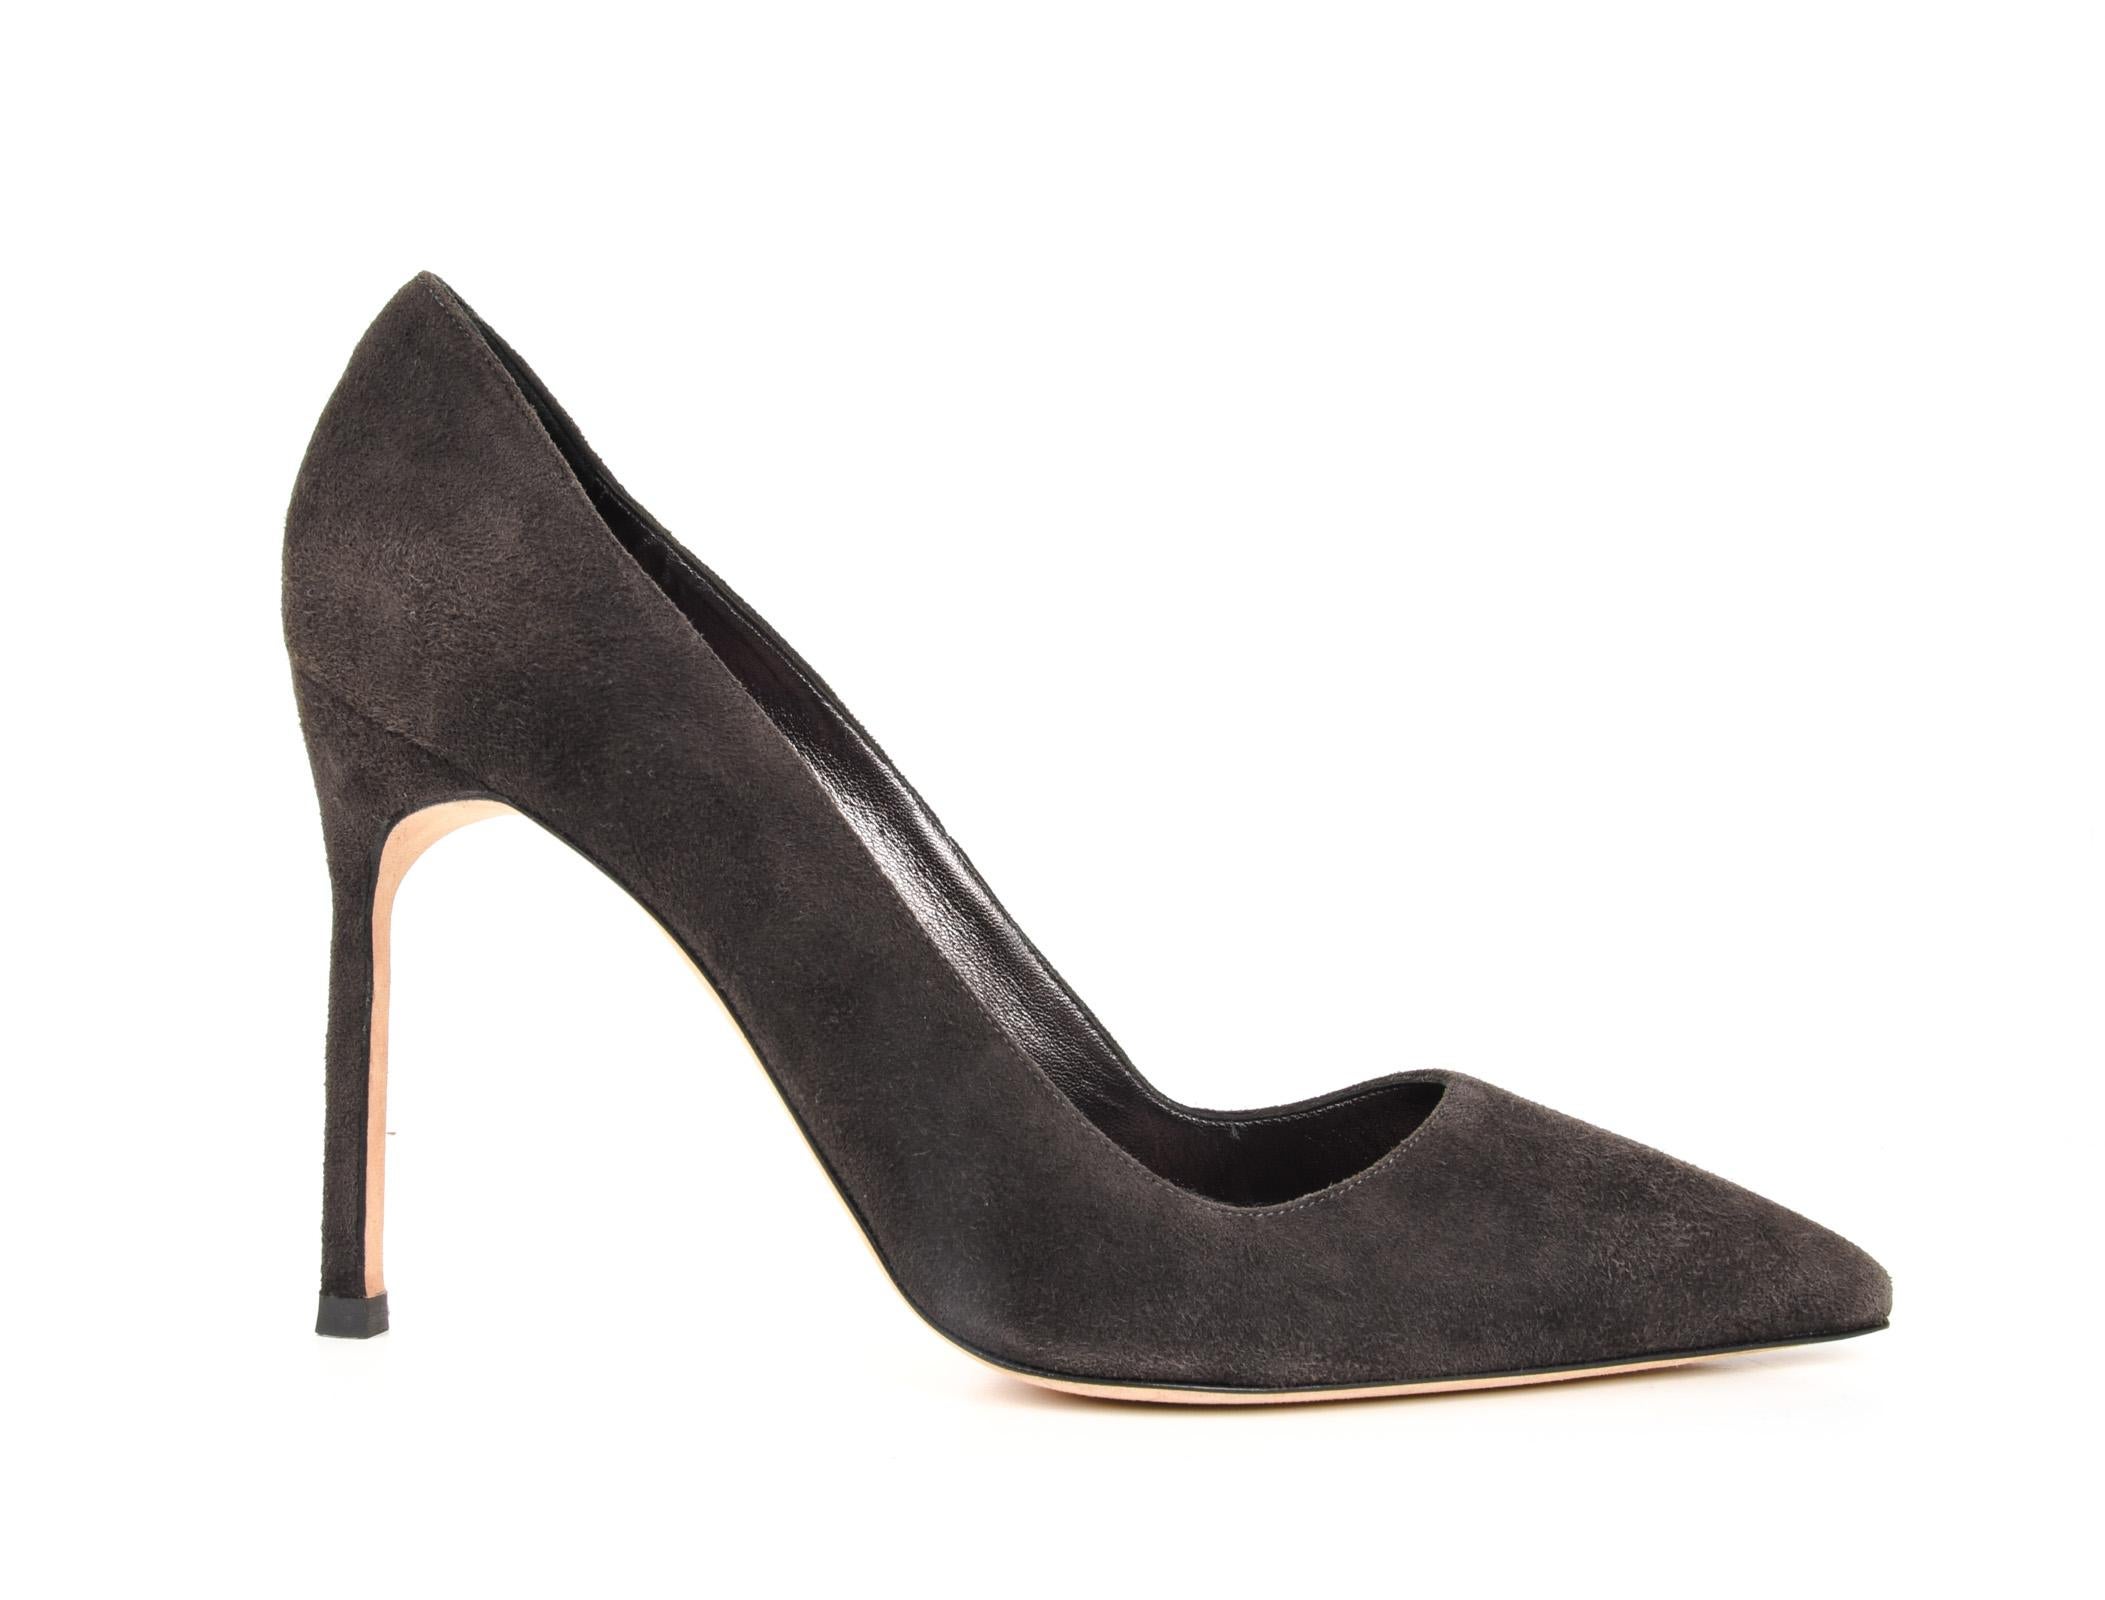 Guaranteed authentic Manolo Blahnik classic charcoal gray suede pump.
Pointed toe.
Covered heel.
Comes with sleeper.
NEW or NEVER WORN     

SIZE  40
USA SIZE 10 
  
SHOE  MEASURES:
HEEL 4